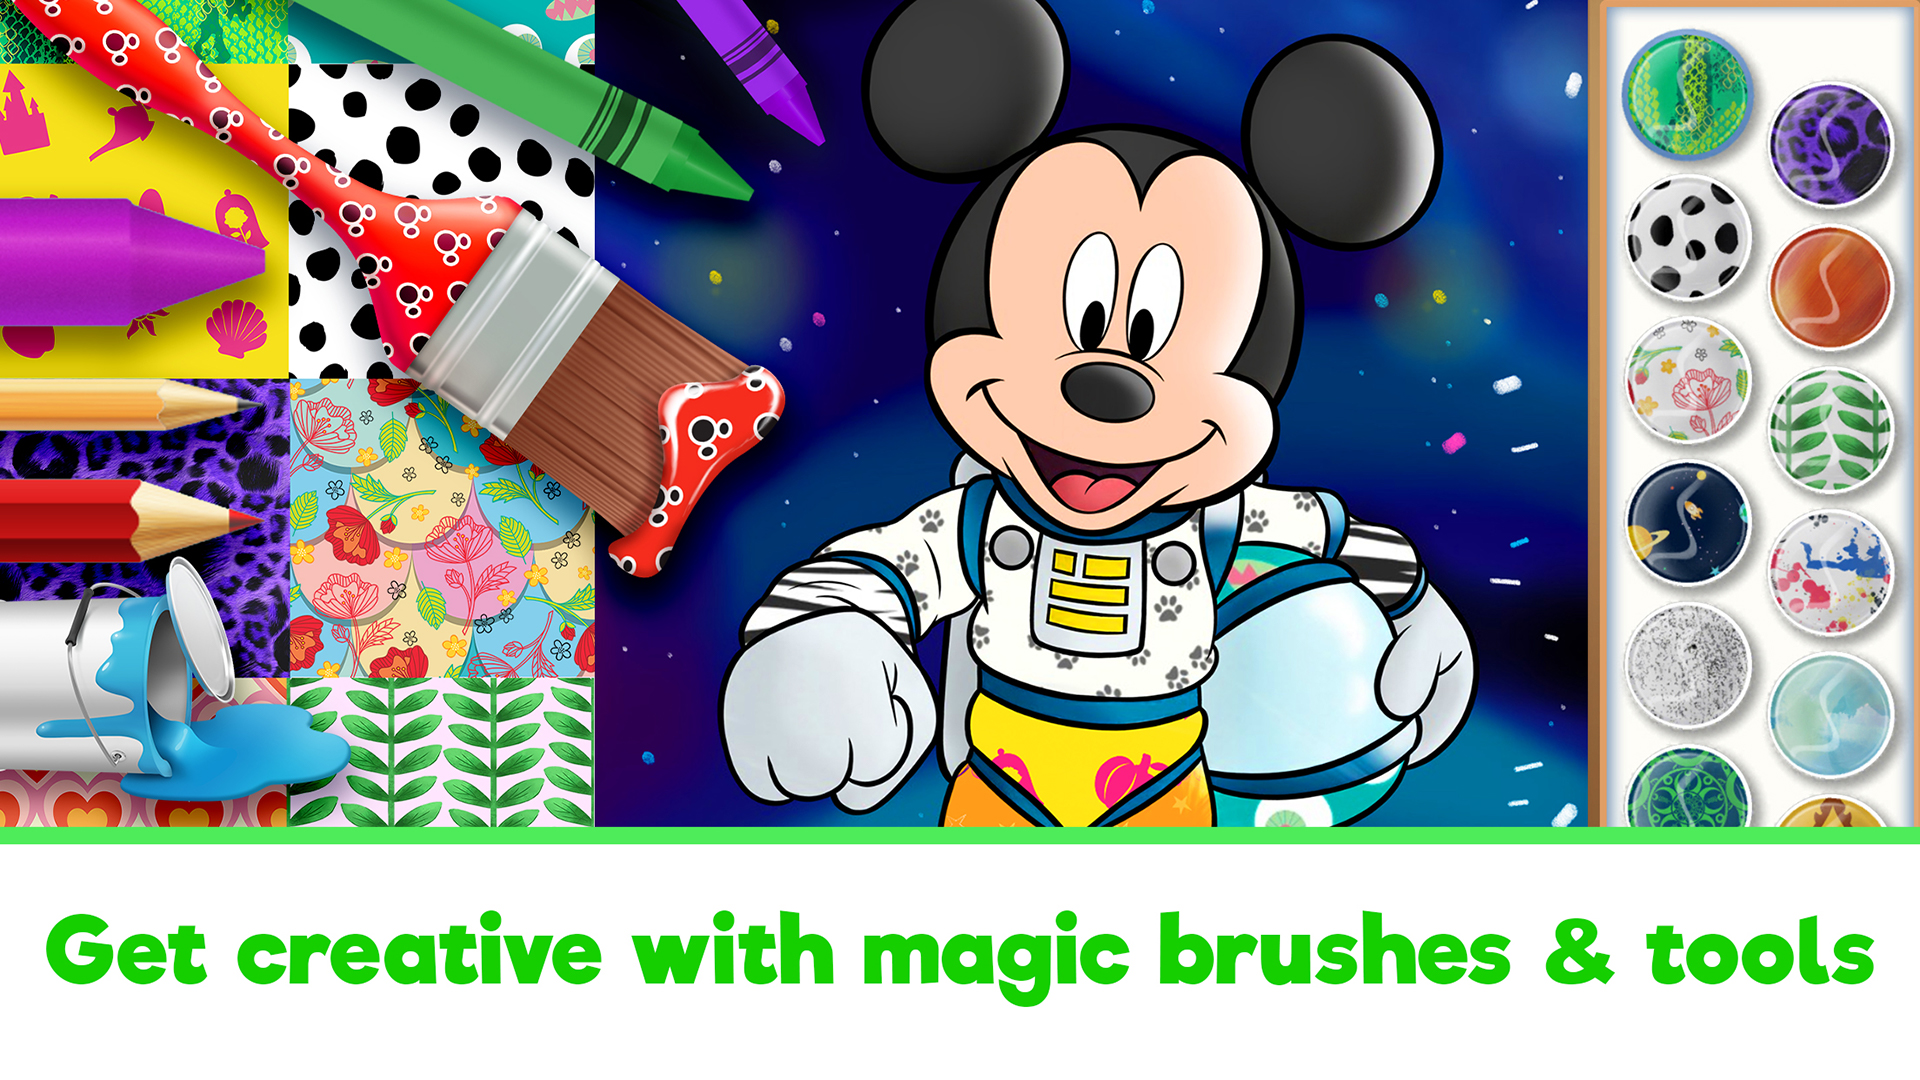 Disney Coloring World - Coloring, Drawing, Painting & Art Games for Kids